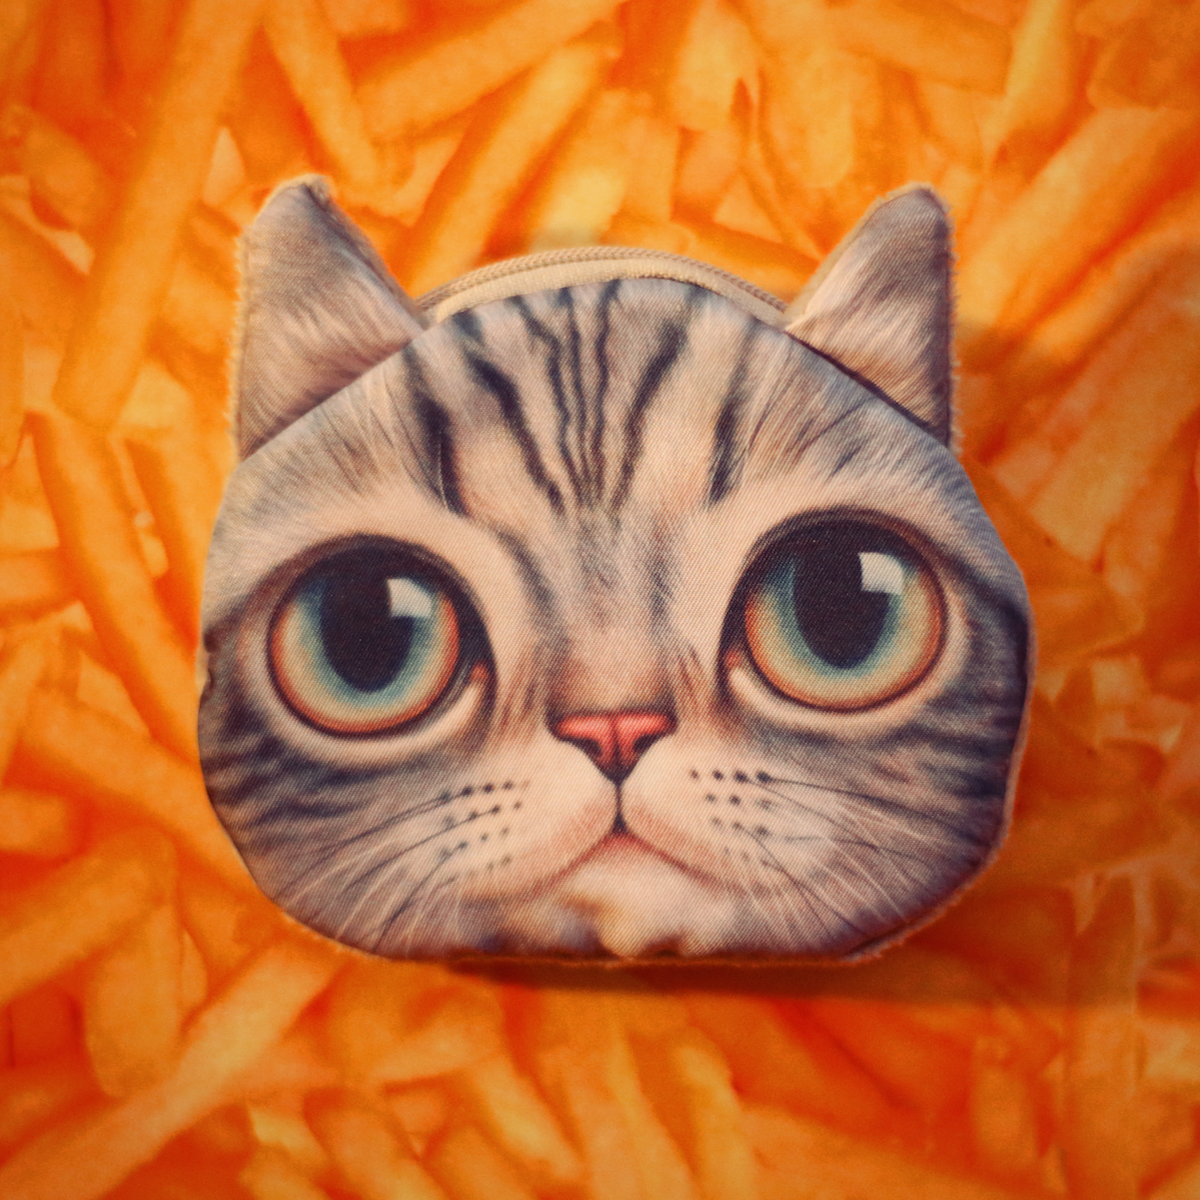 Cat face coin purse with ears - Ice Cream Cake